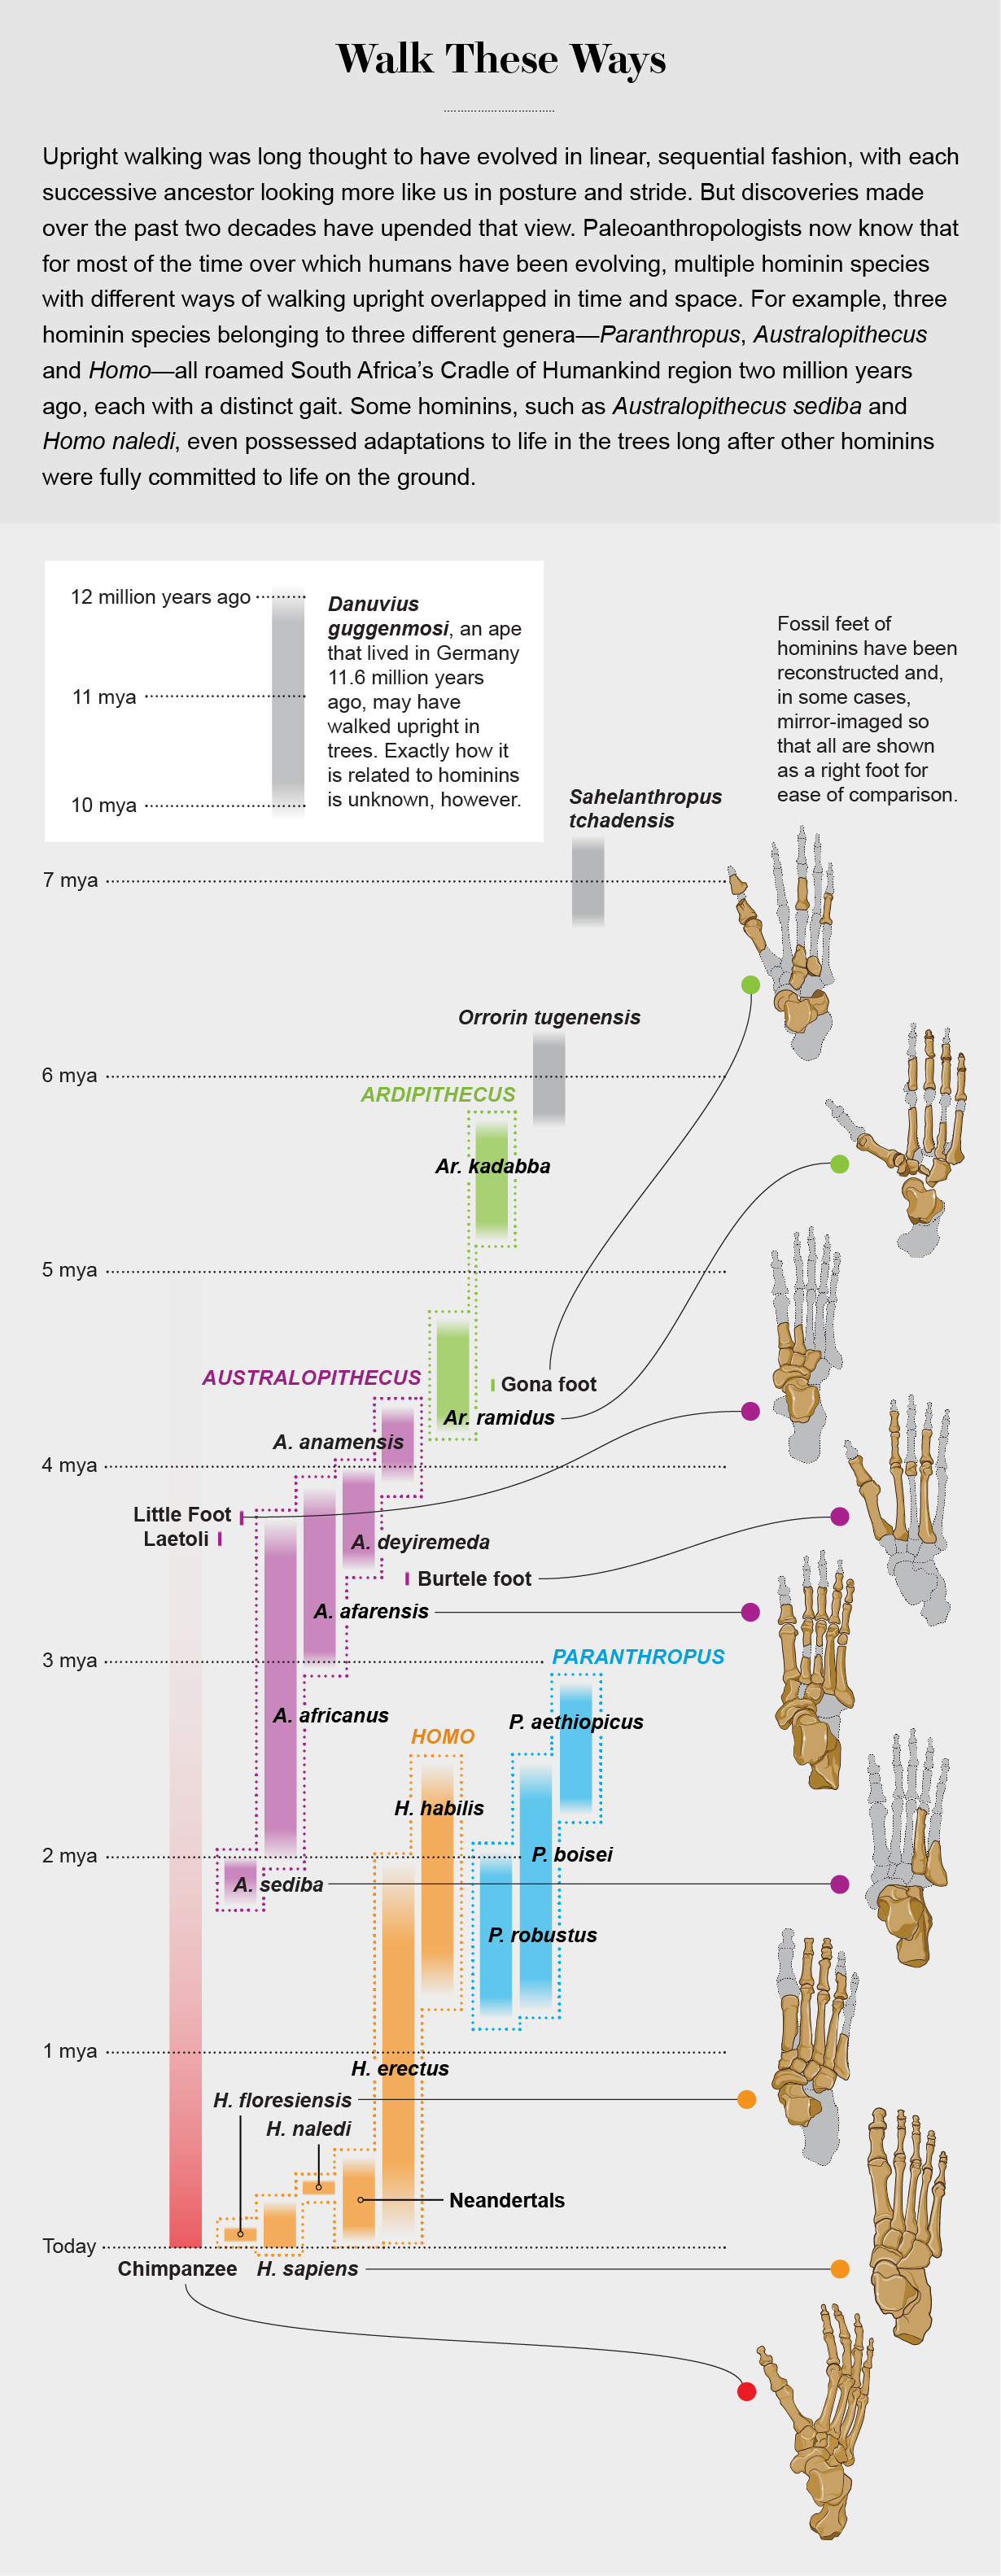 Family tree shows time spans associated with our evolutionary ancestors and highlights foot structures of various hominins.